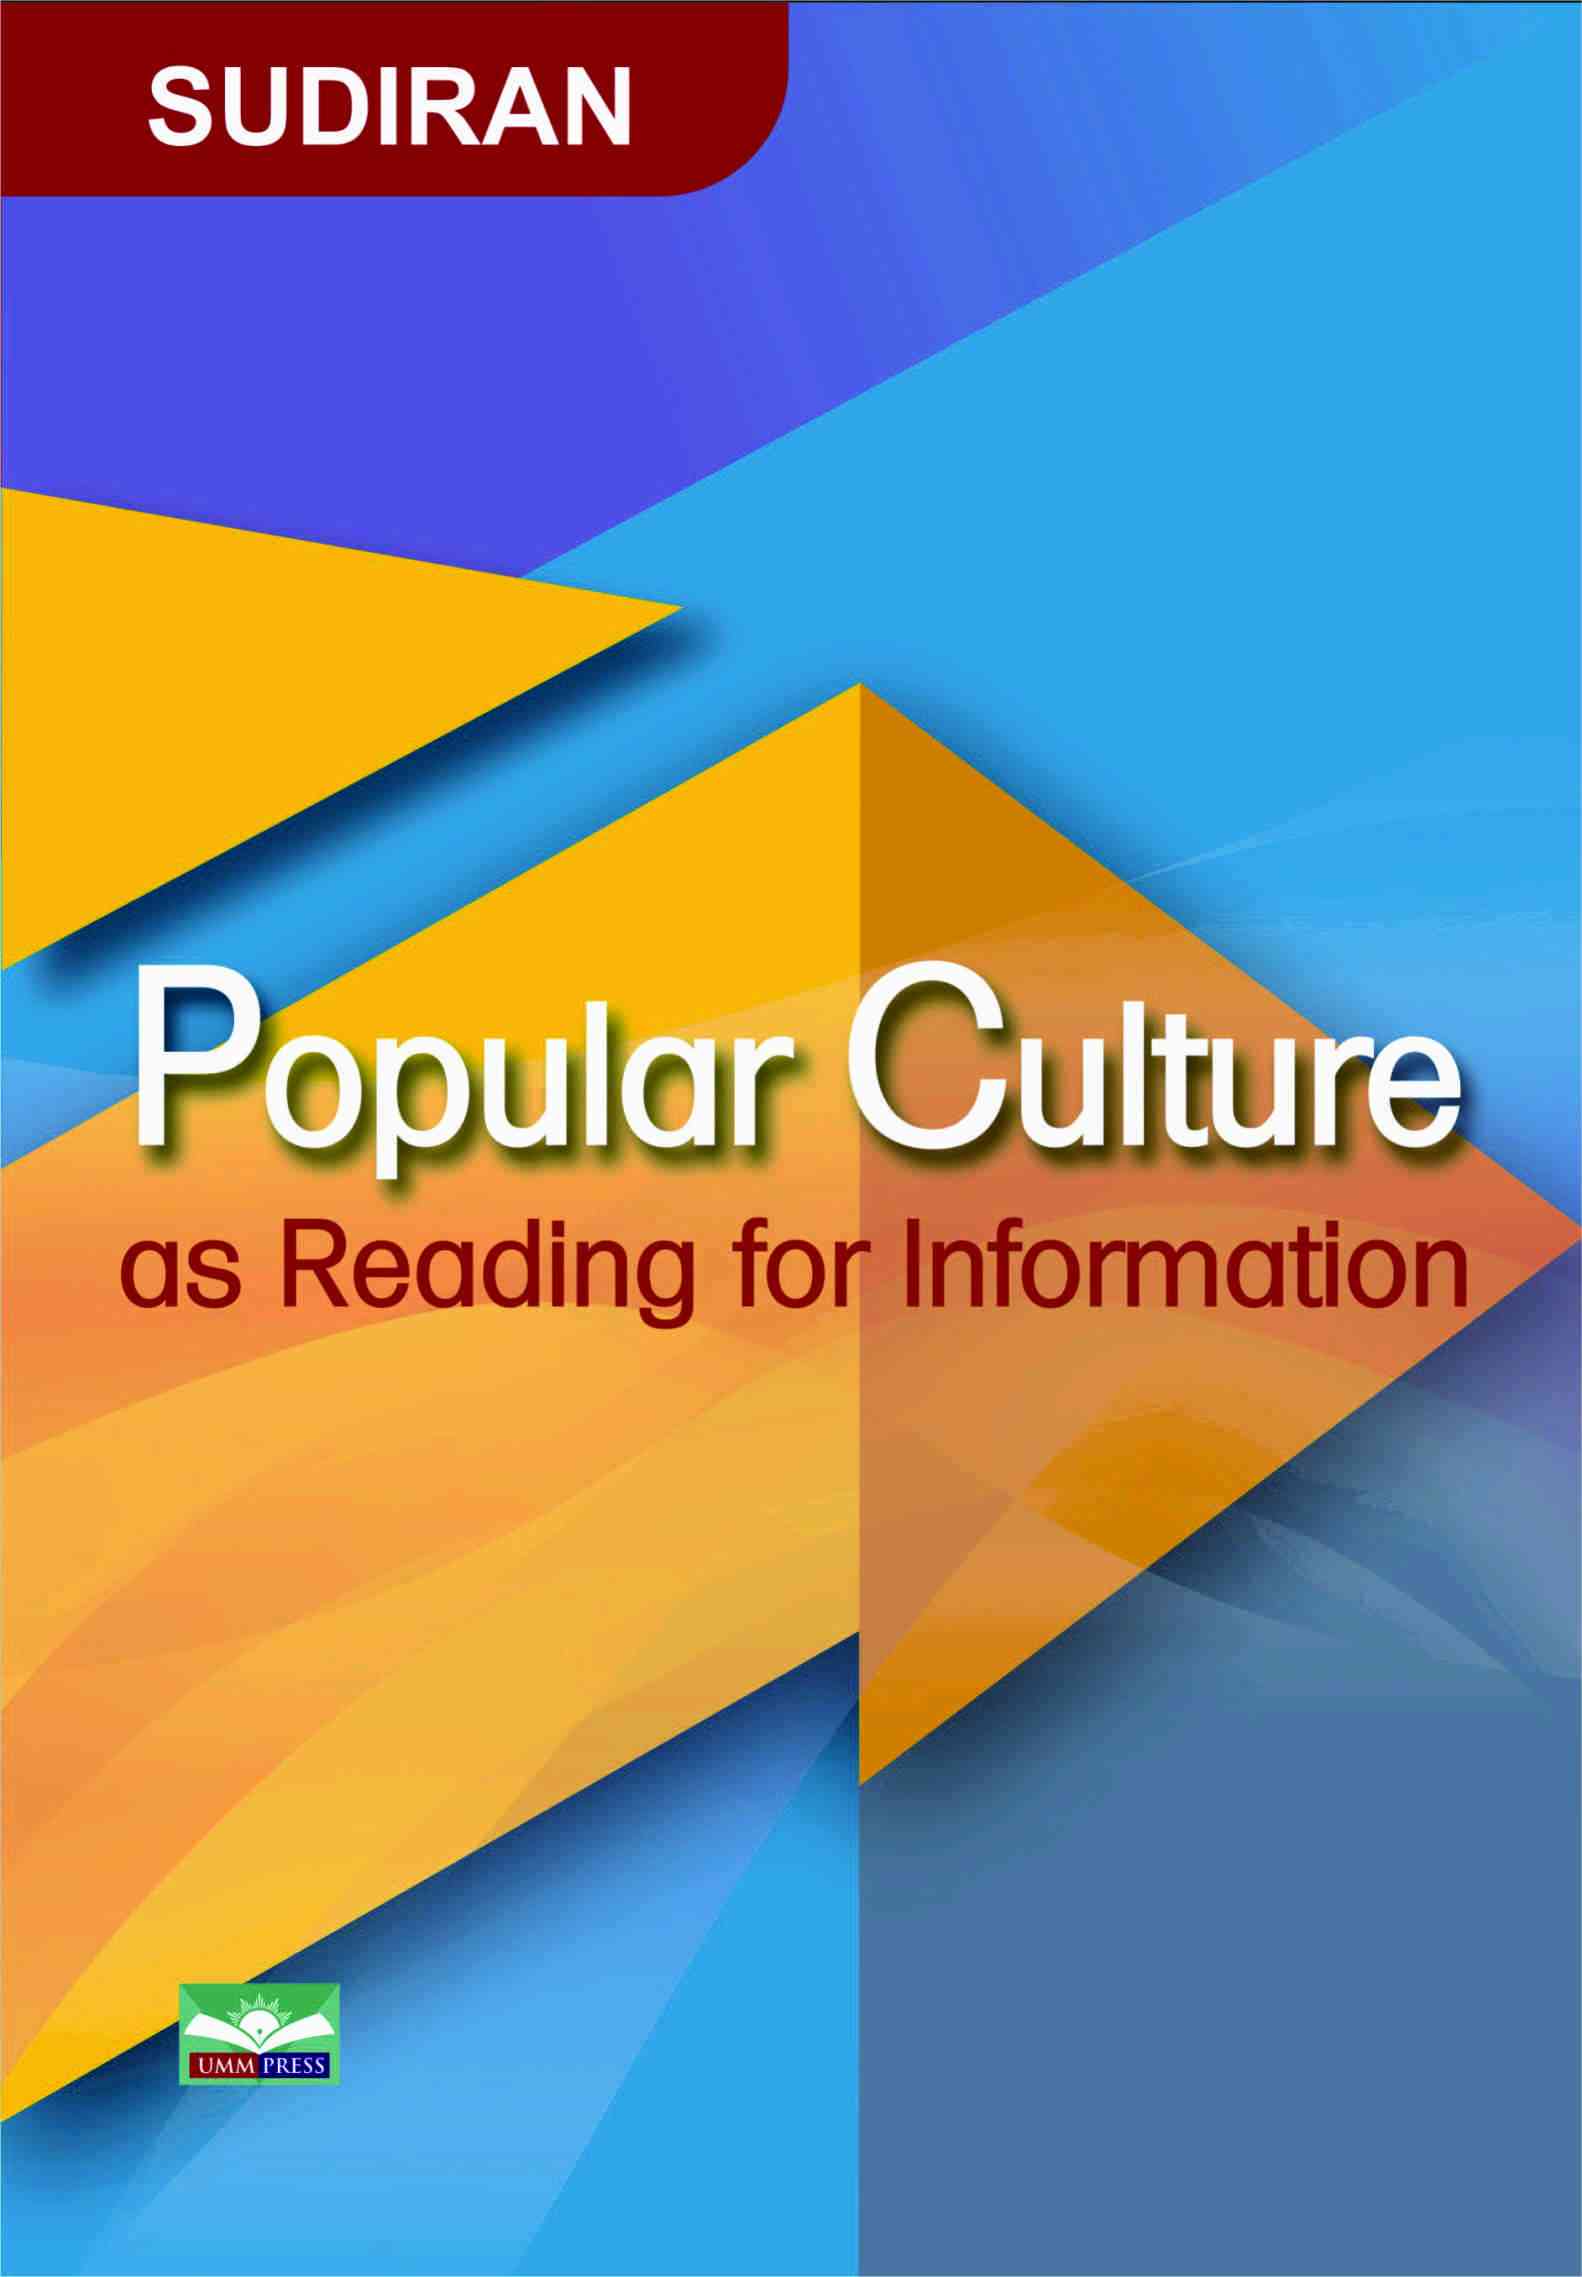 POPULAR CULTURE AS READING FOR INFORMATION